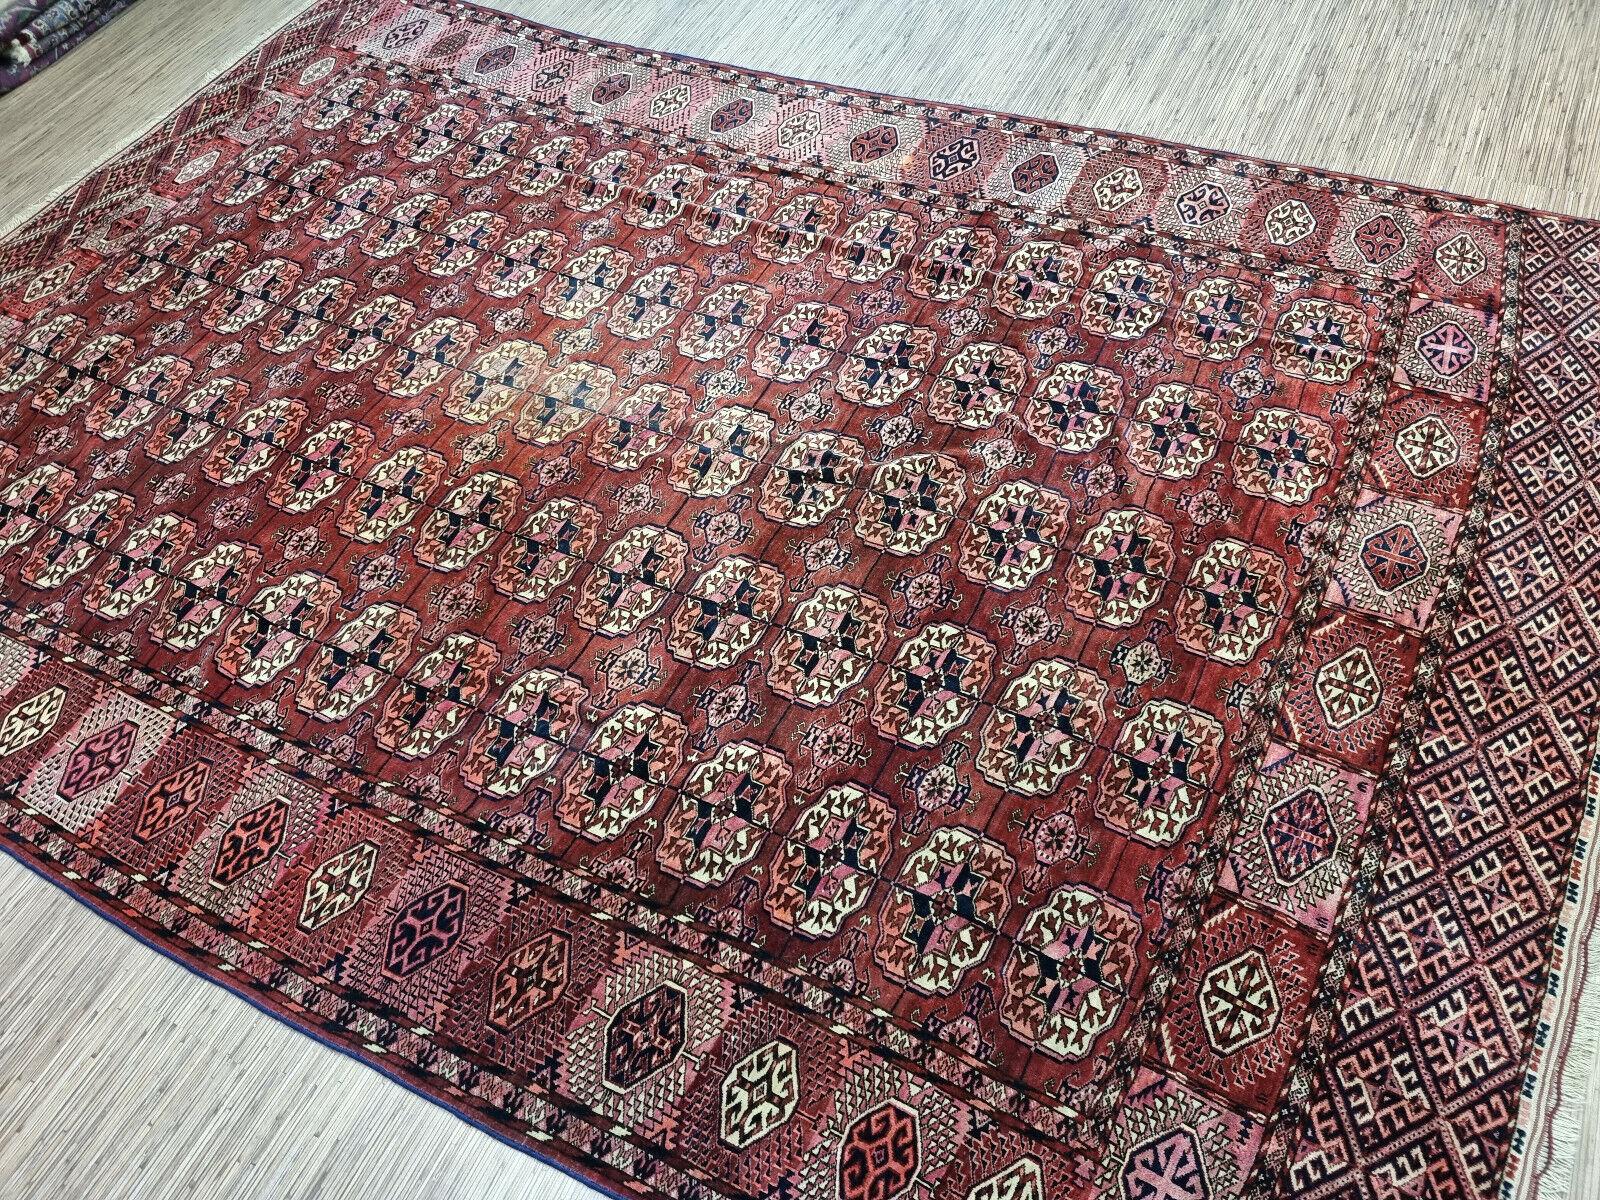 Embrace the history and culture of Turkmenistan with this Handmade Antique Turkmen Tekke Rug. This stunning rug measures at 7.5’ x 11.6’ (230cm x 355cm), making it a great addition to any room.

Color Palette: The rug features a vibrant red field